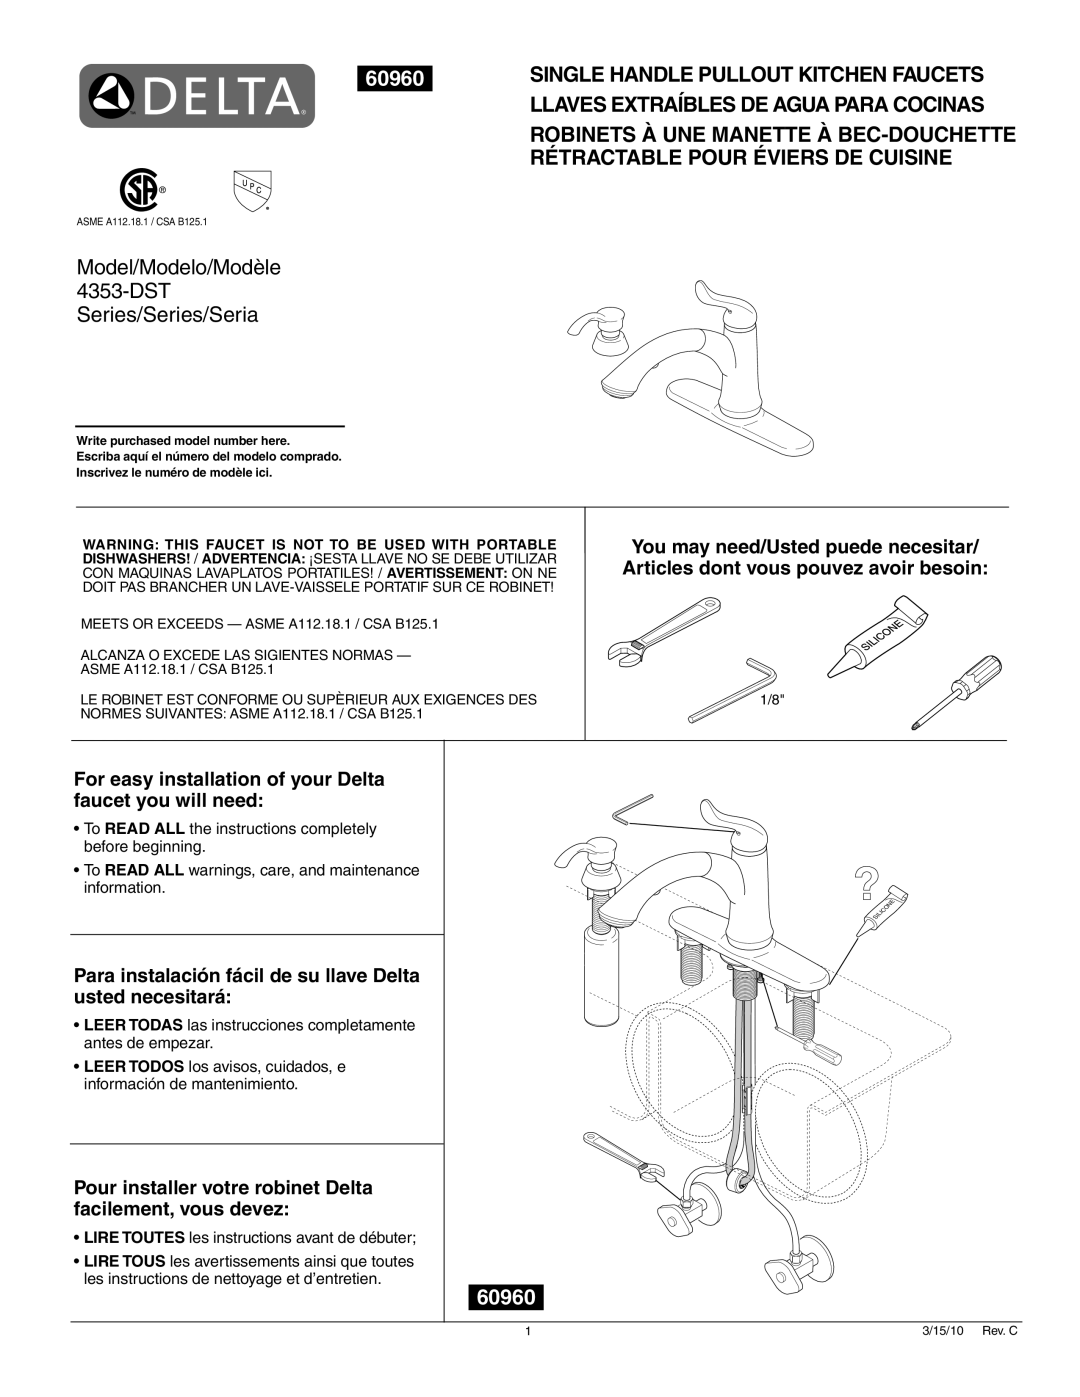 Delta Faucet 4353-DST, 4353-SD-DST manual 60960, Warning This Faucet Is Not To Be Used With Portable 